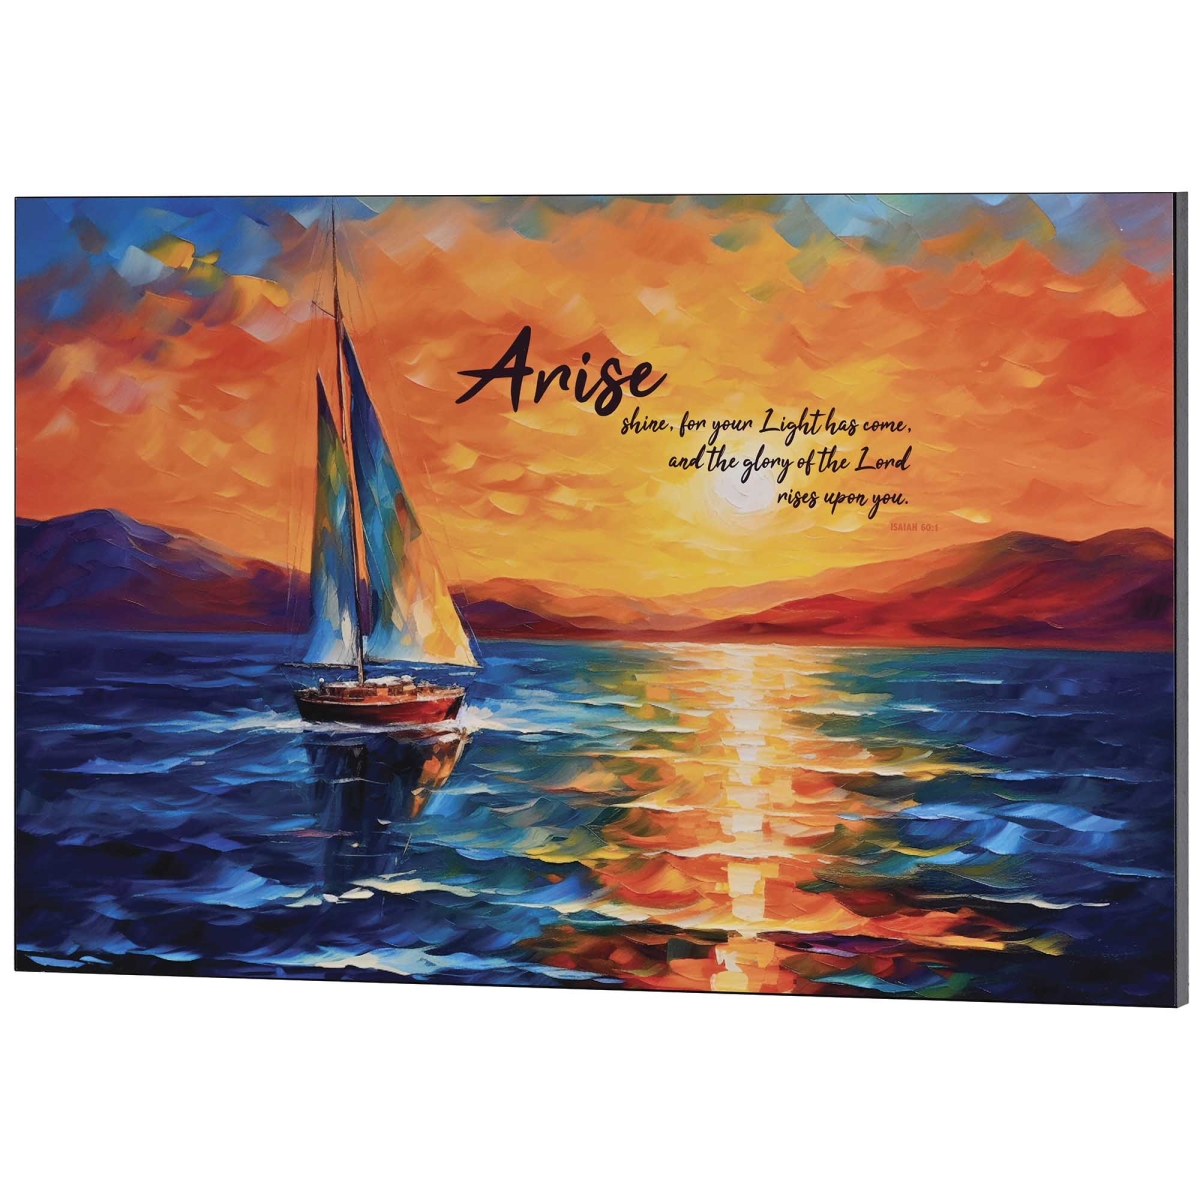 Picture of Dicksons PLK2013-371 Wall Plaque Arise Shine Isaiah 60:1